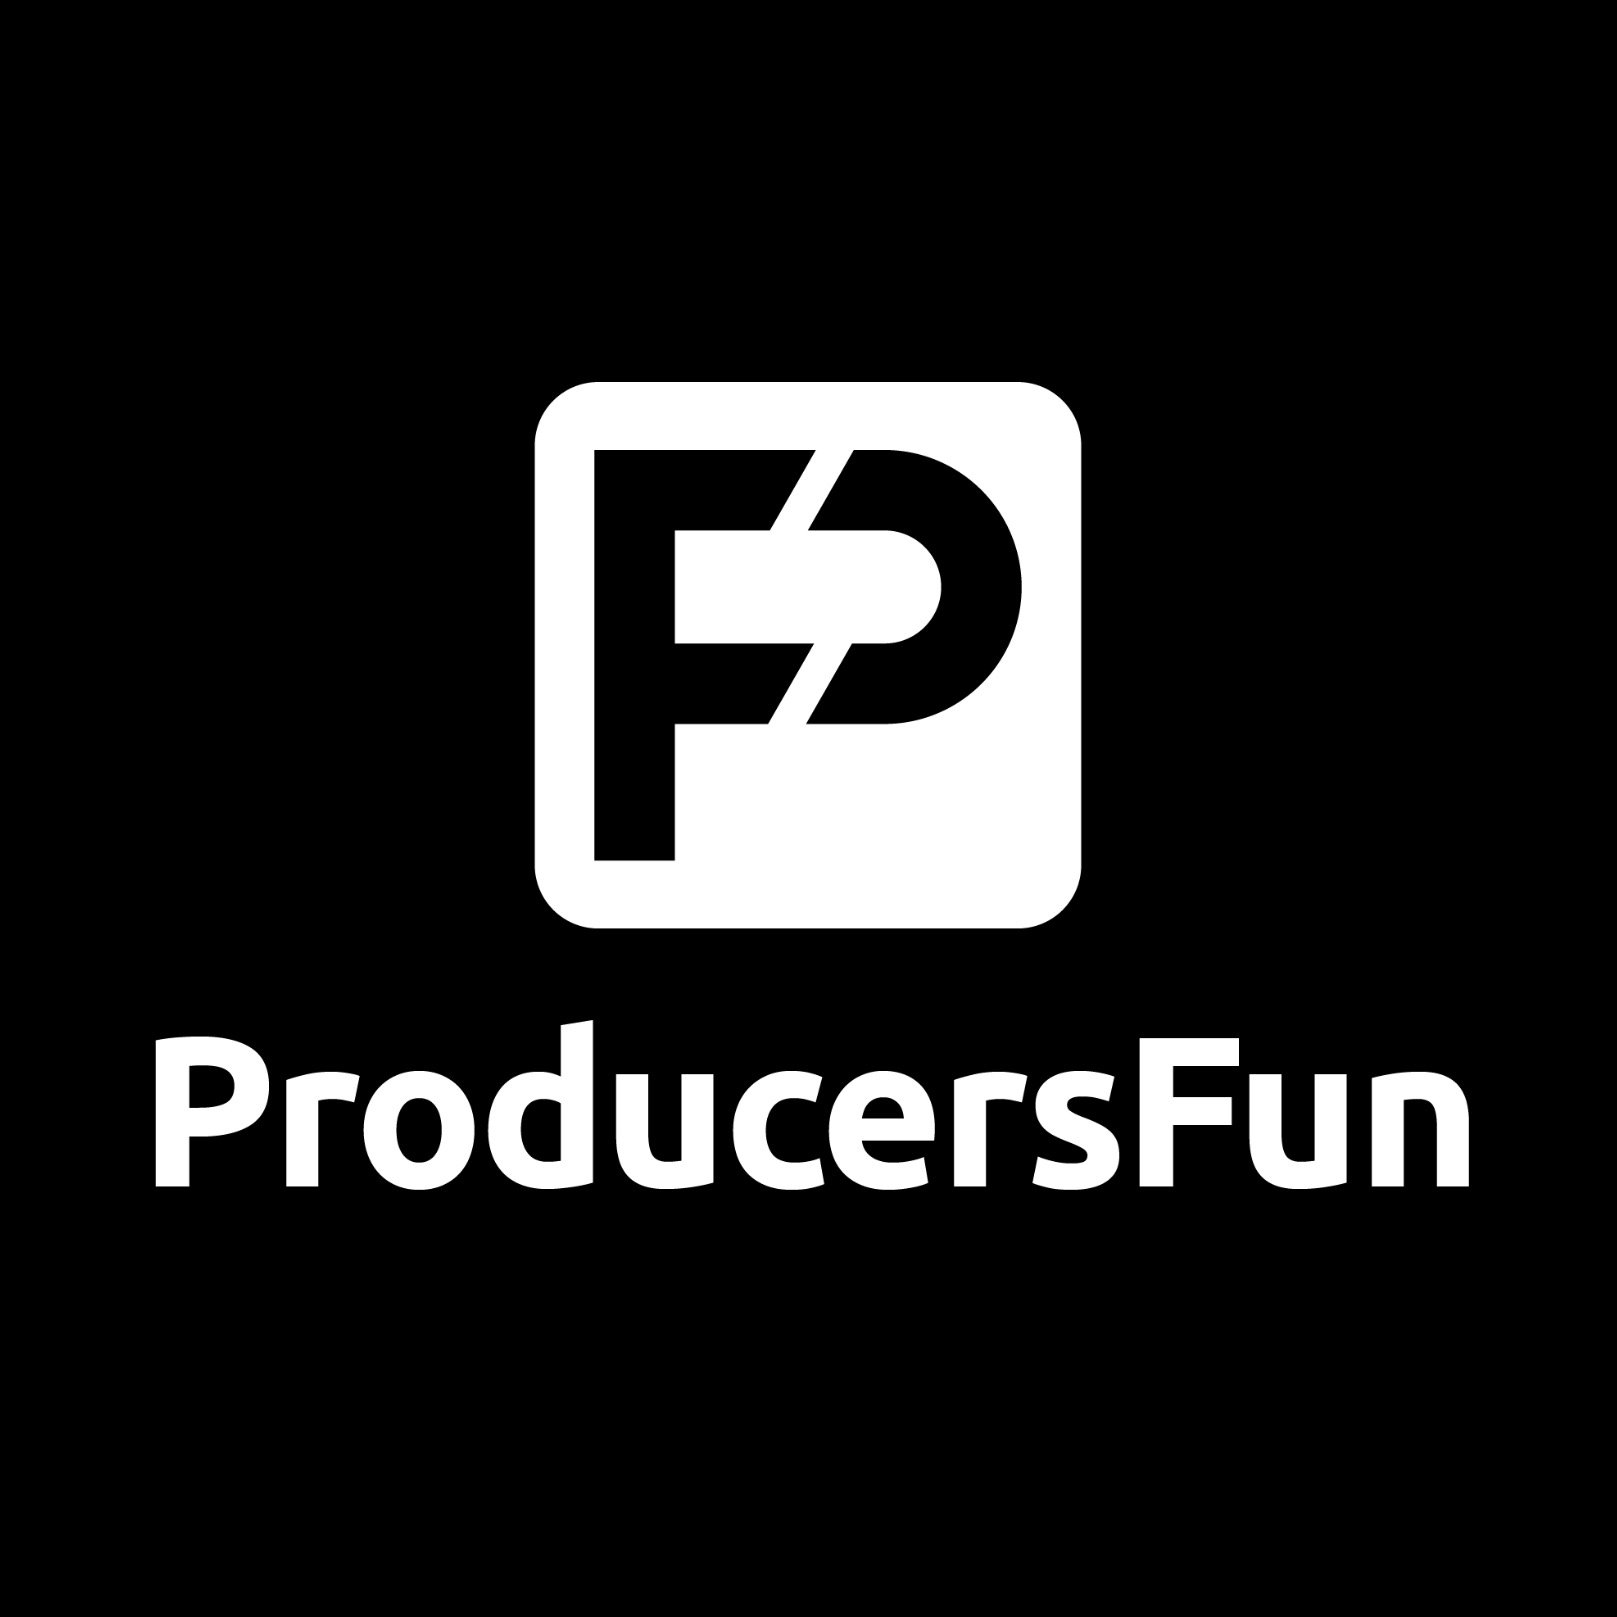 Official Twitter Account of Your Favorite Studio. We’re Always having fun with the talent.